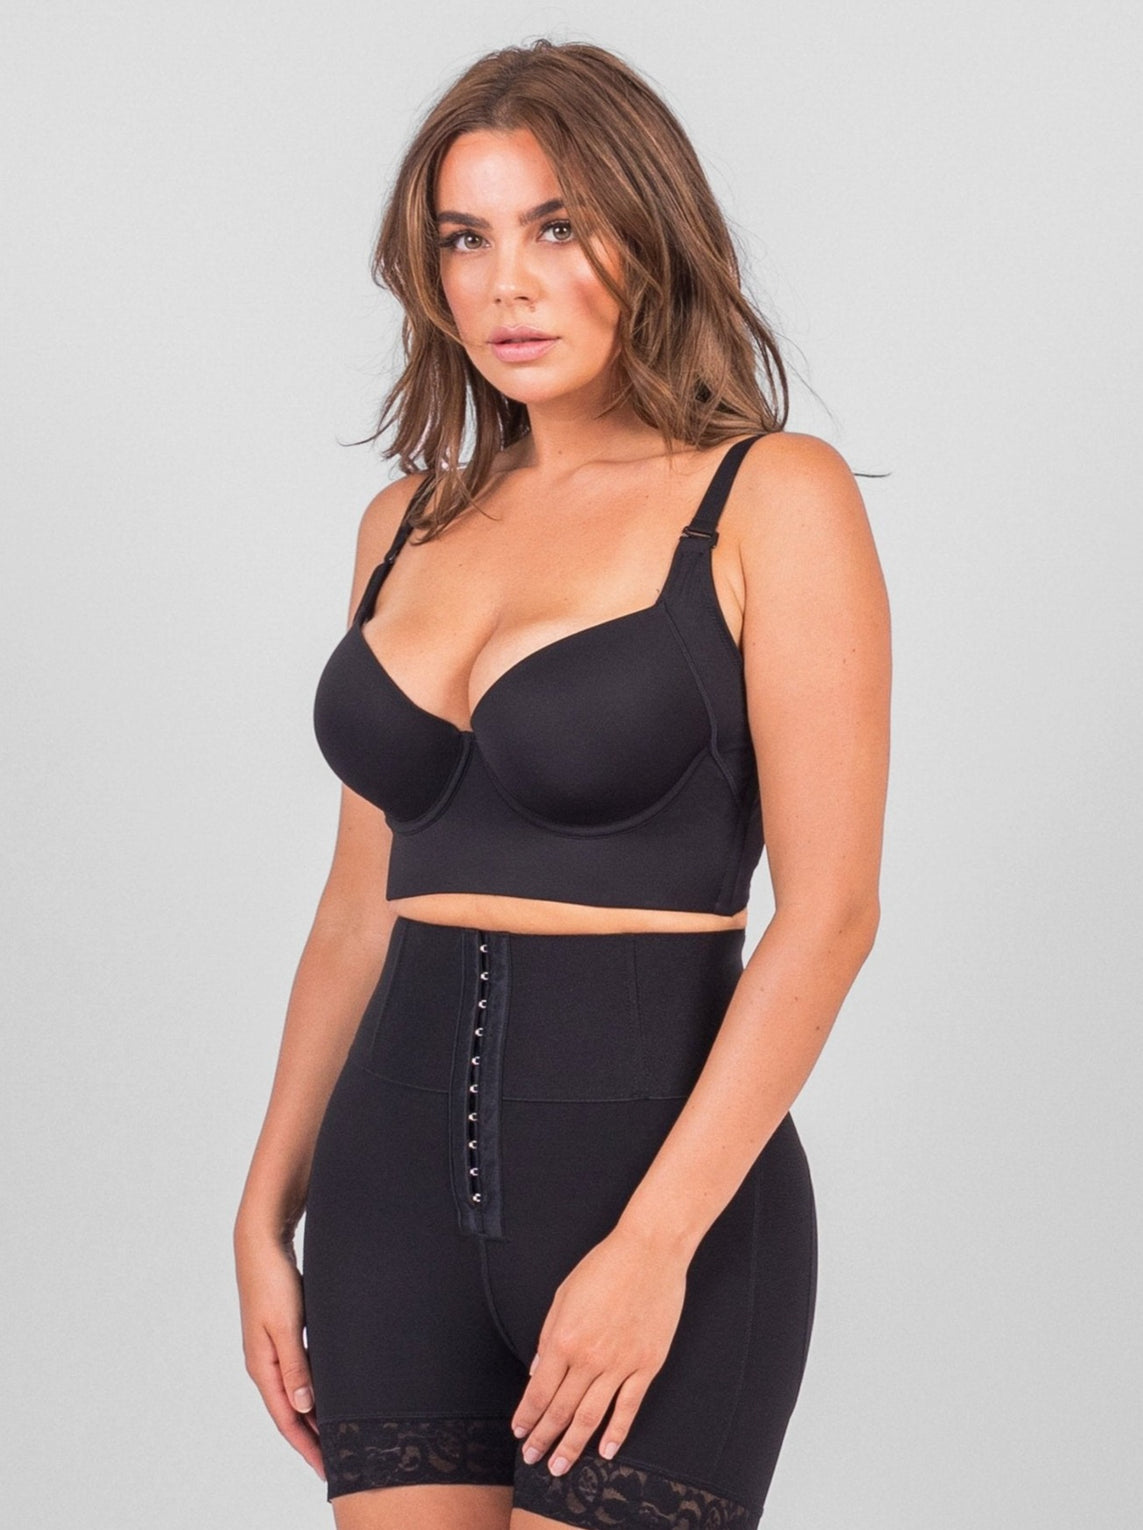 Align Strappy Yoga Bra: Sexy, Push Up, And Wireless Womens Workout Tops  From Hellowelcomelulus, $2.6